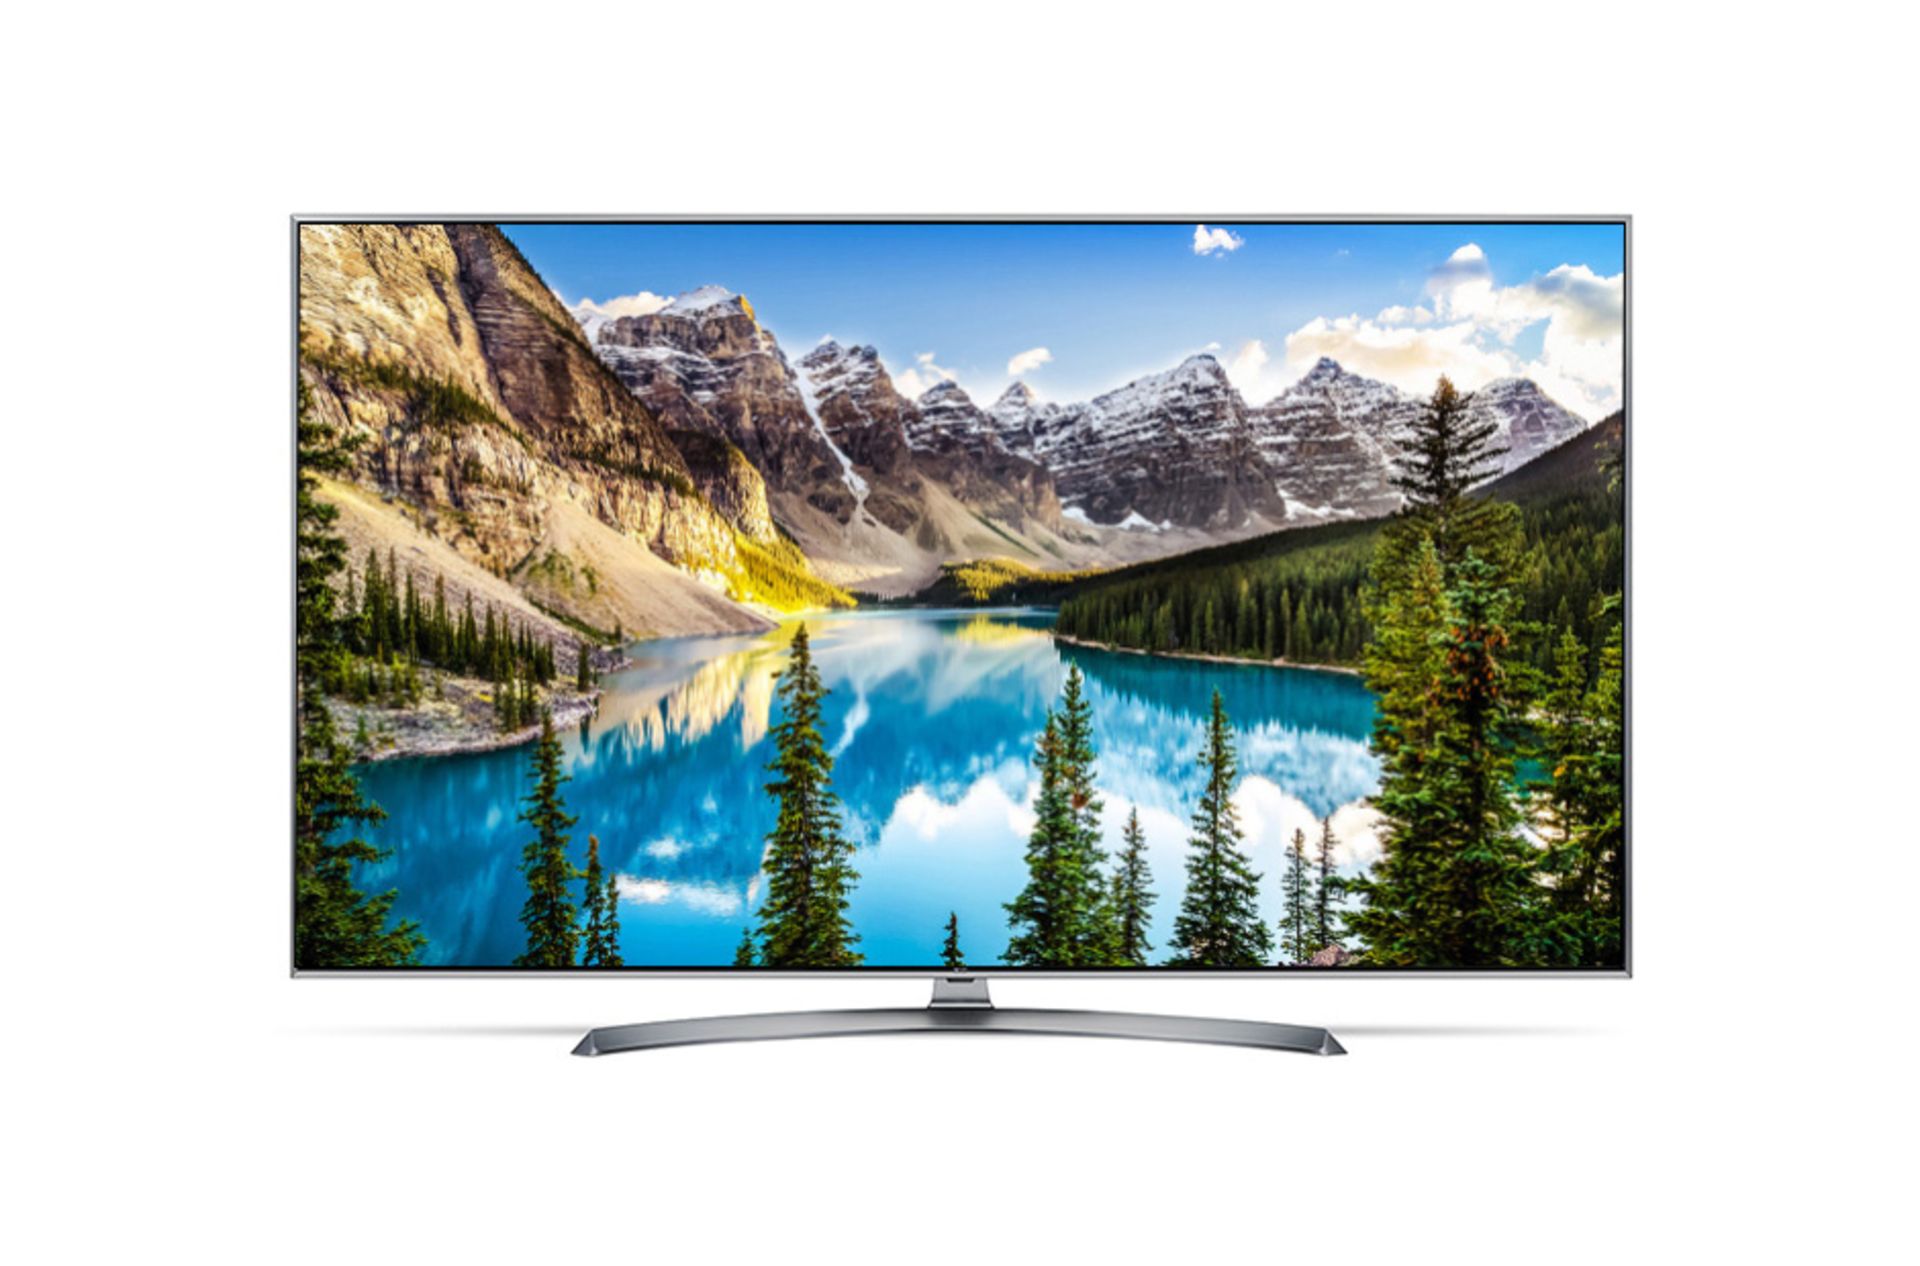 V Grade A LG 65 Inch ACTIVE HDR 4K ULTRA HD LED SMART TV WITH FREEVIEW & WEBOS 3.5 & WIFI 65UJ7507